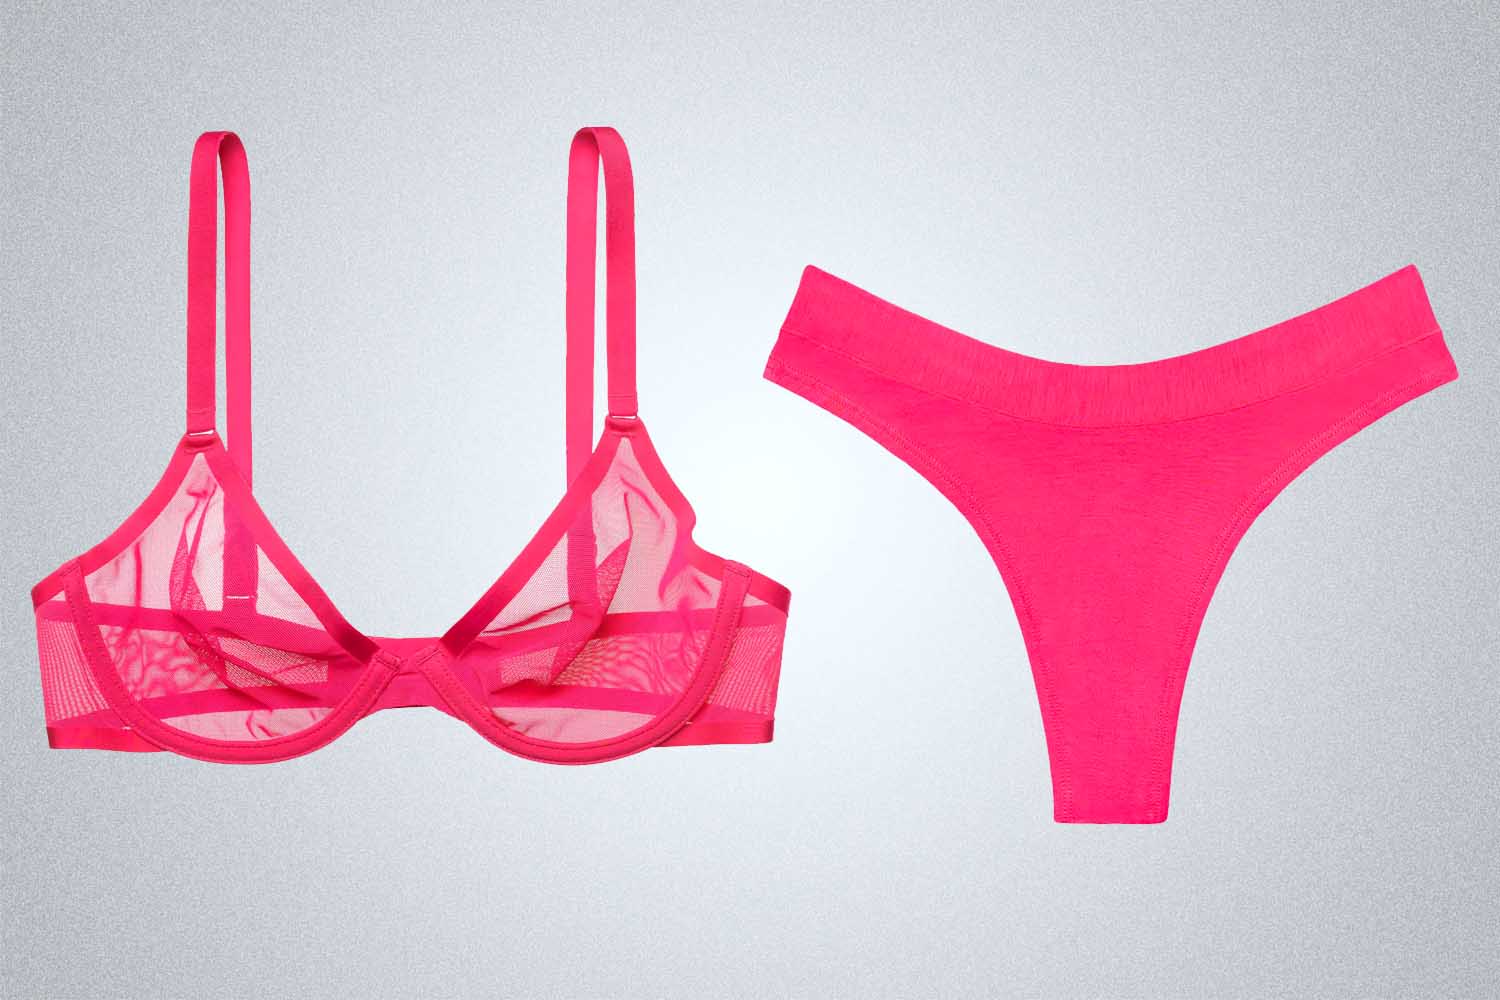 7 Tips On How To Buy Her Lingerie She'll Love – The Adventure